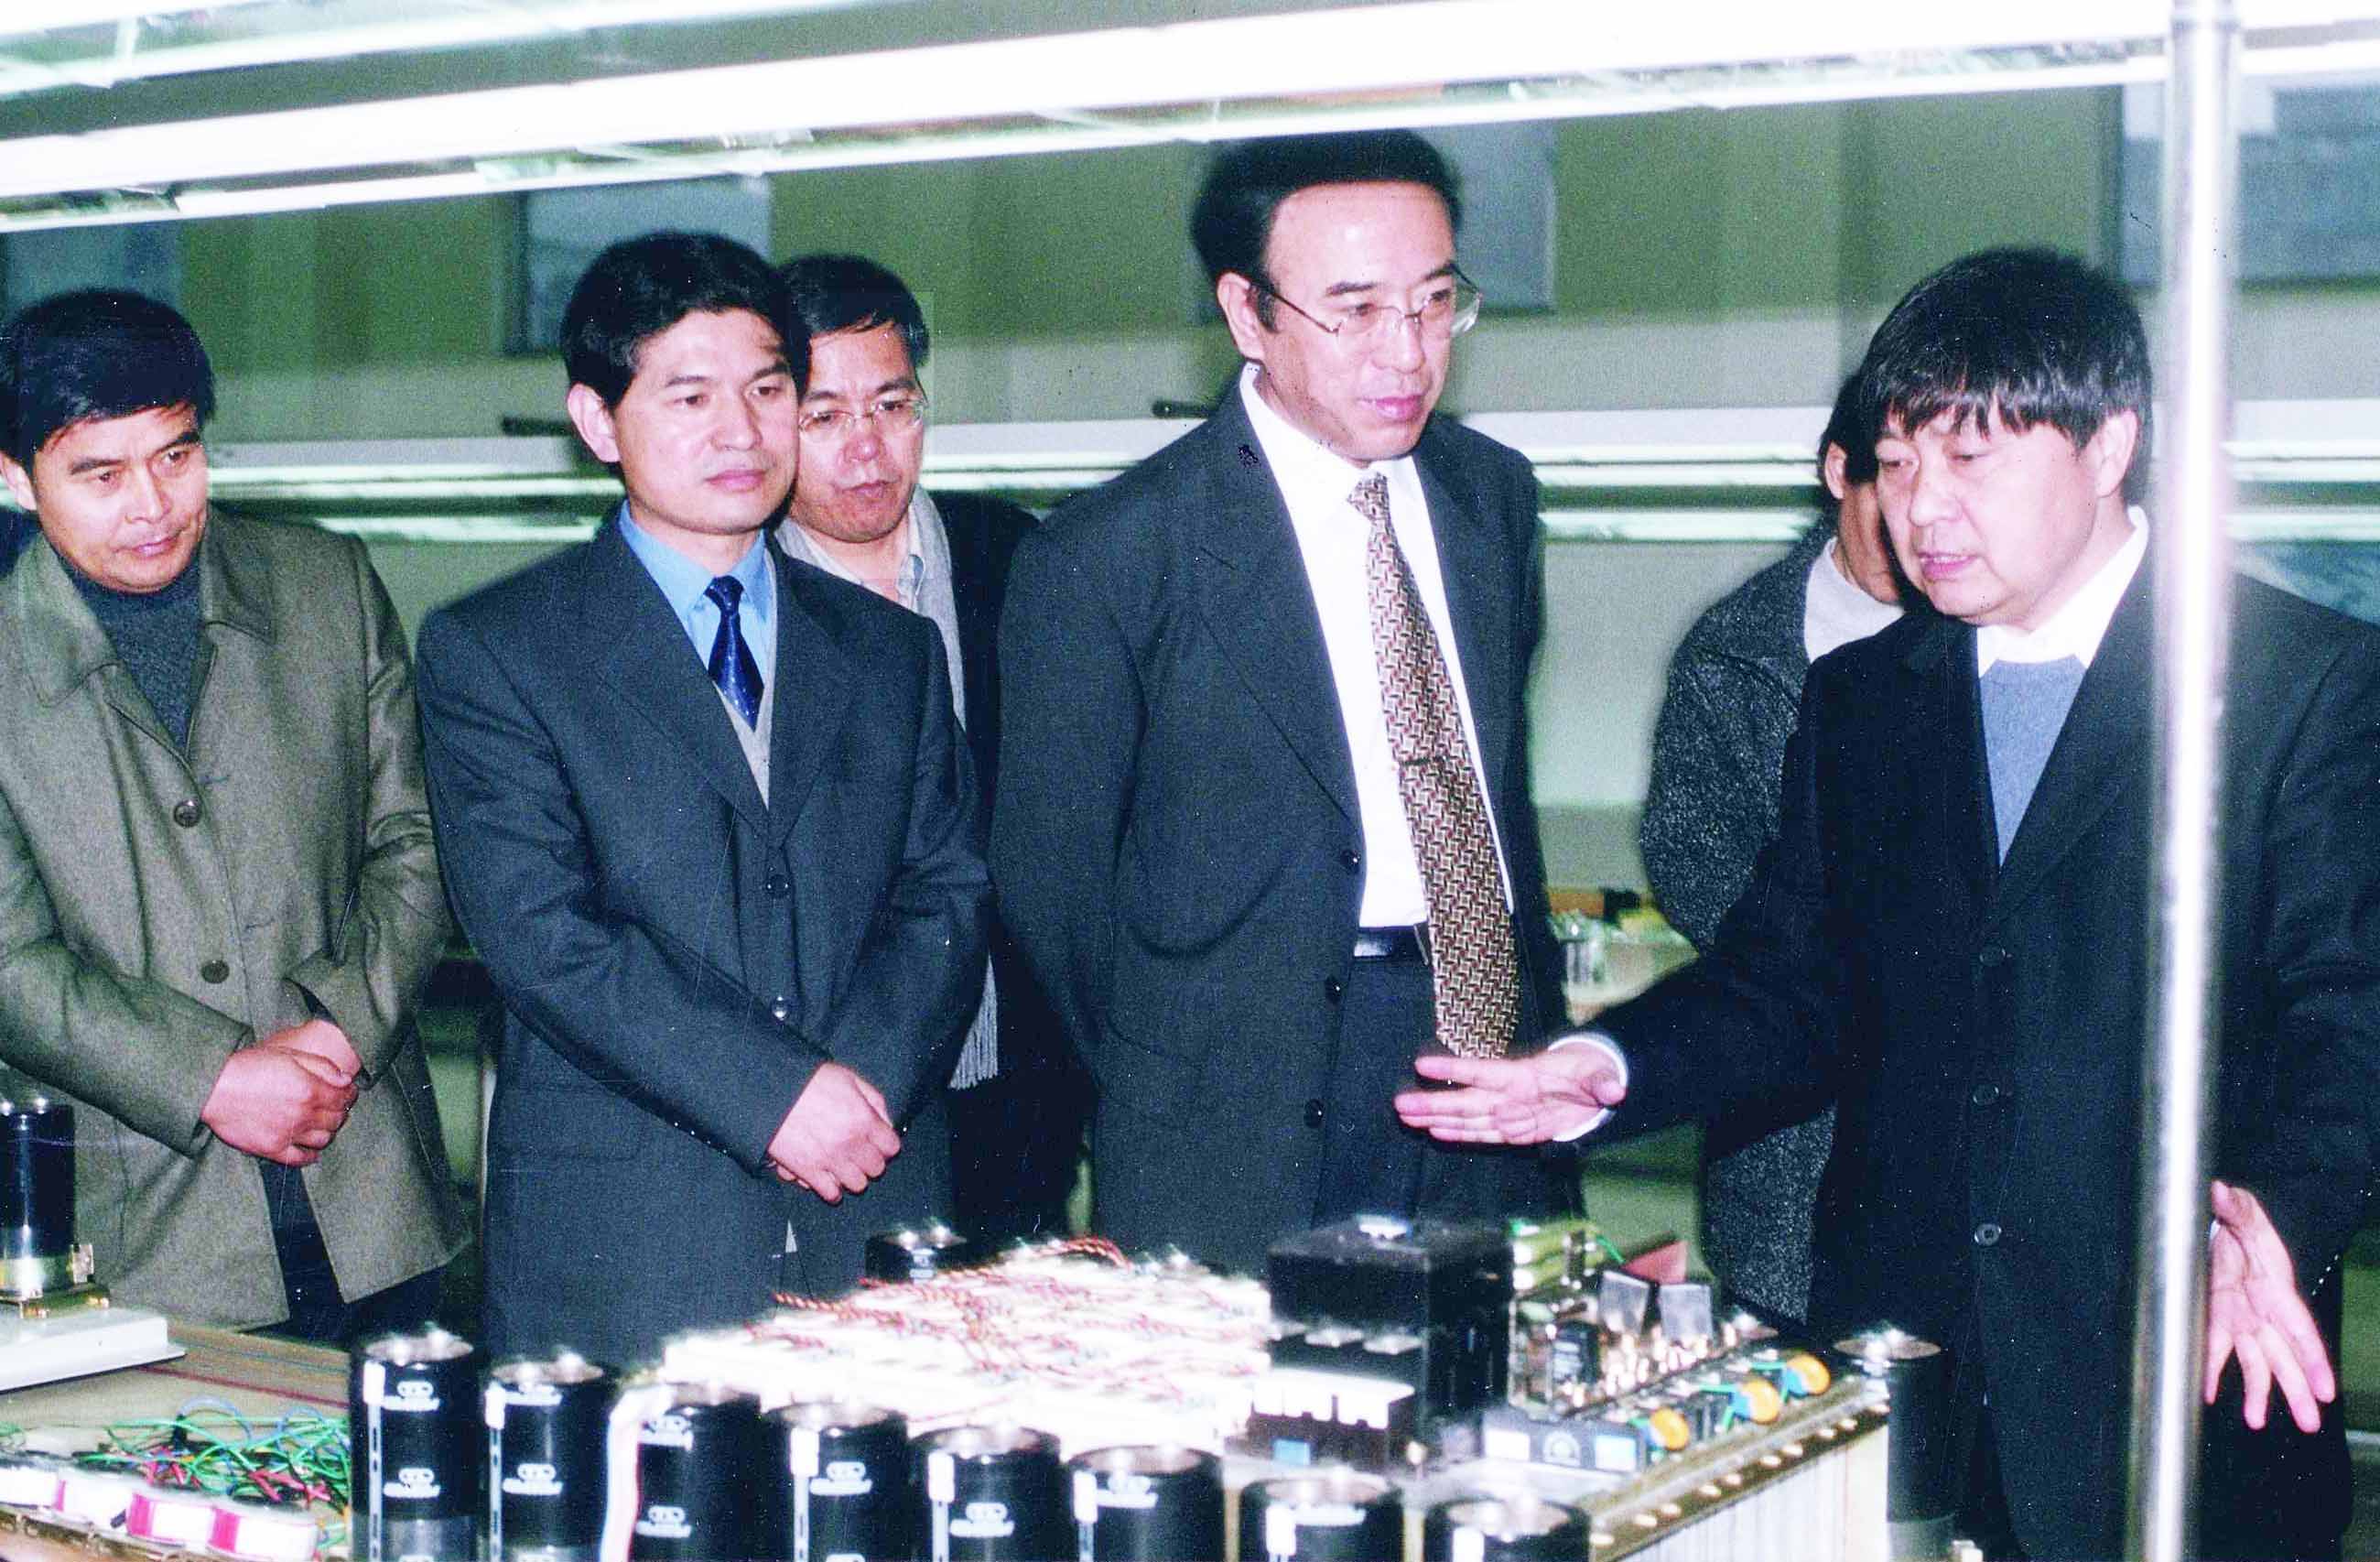 State Intellectual Property Office Commissioner Jingchuan Wang touring the Senlan inverter production line